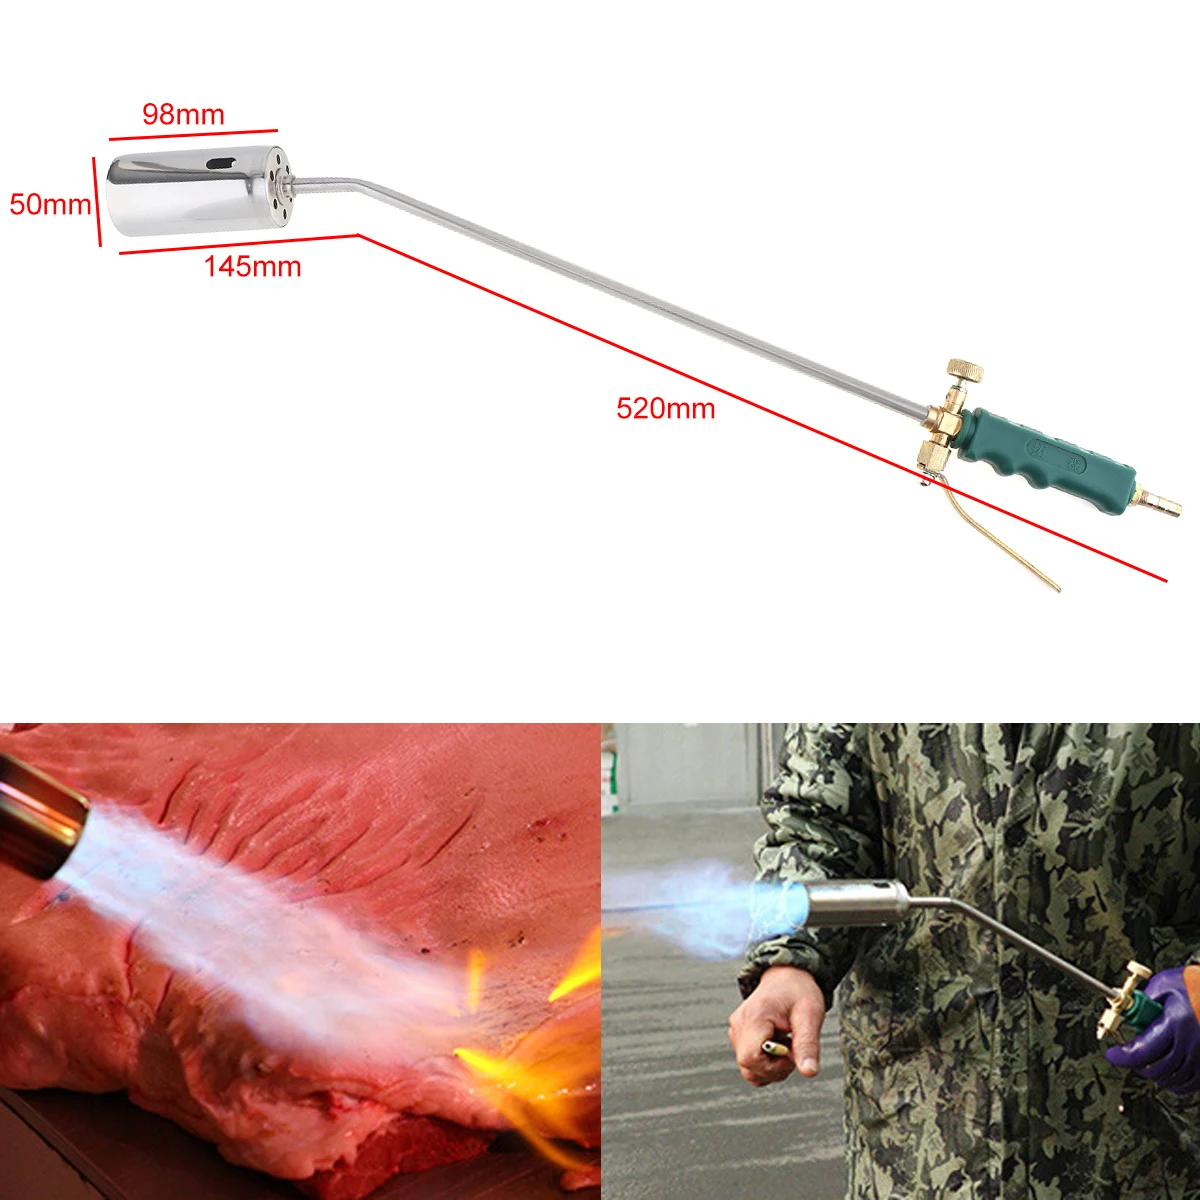 Double Switch Type Liquefied Gas Torch Welding Spitfire-Gun Support Oxygen Acetylene Propane for Barbecue / Hair Removal